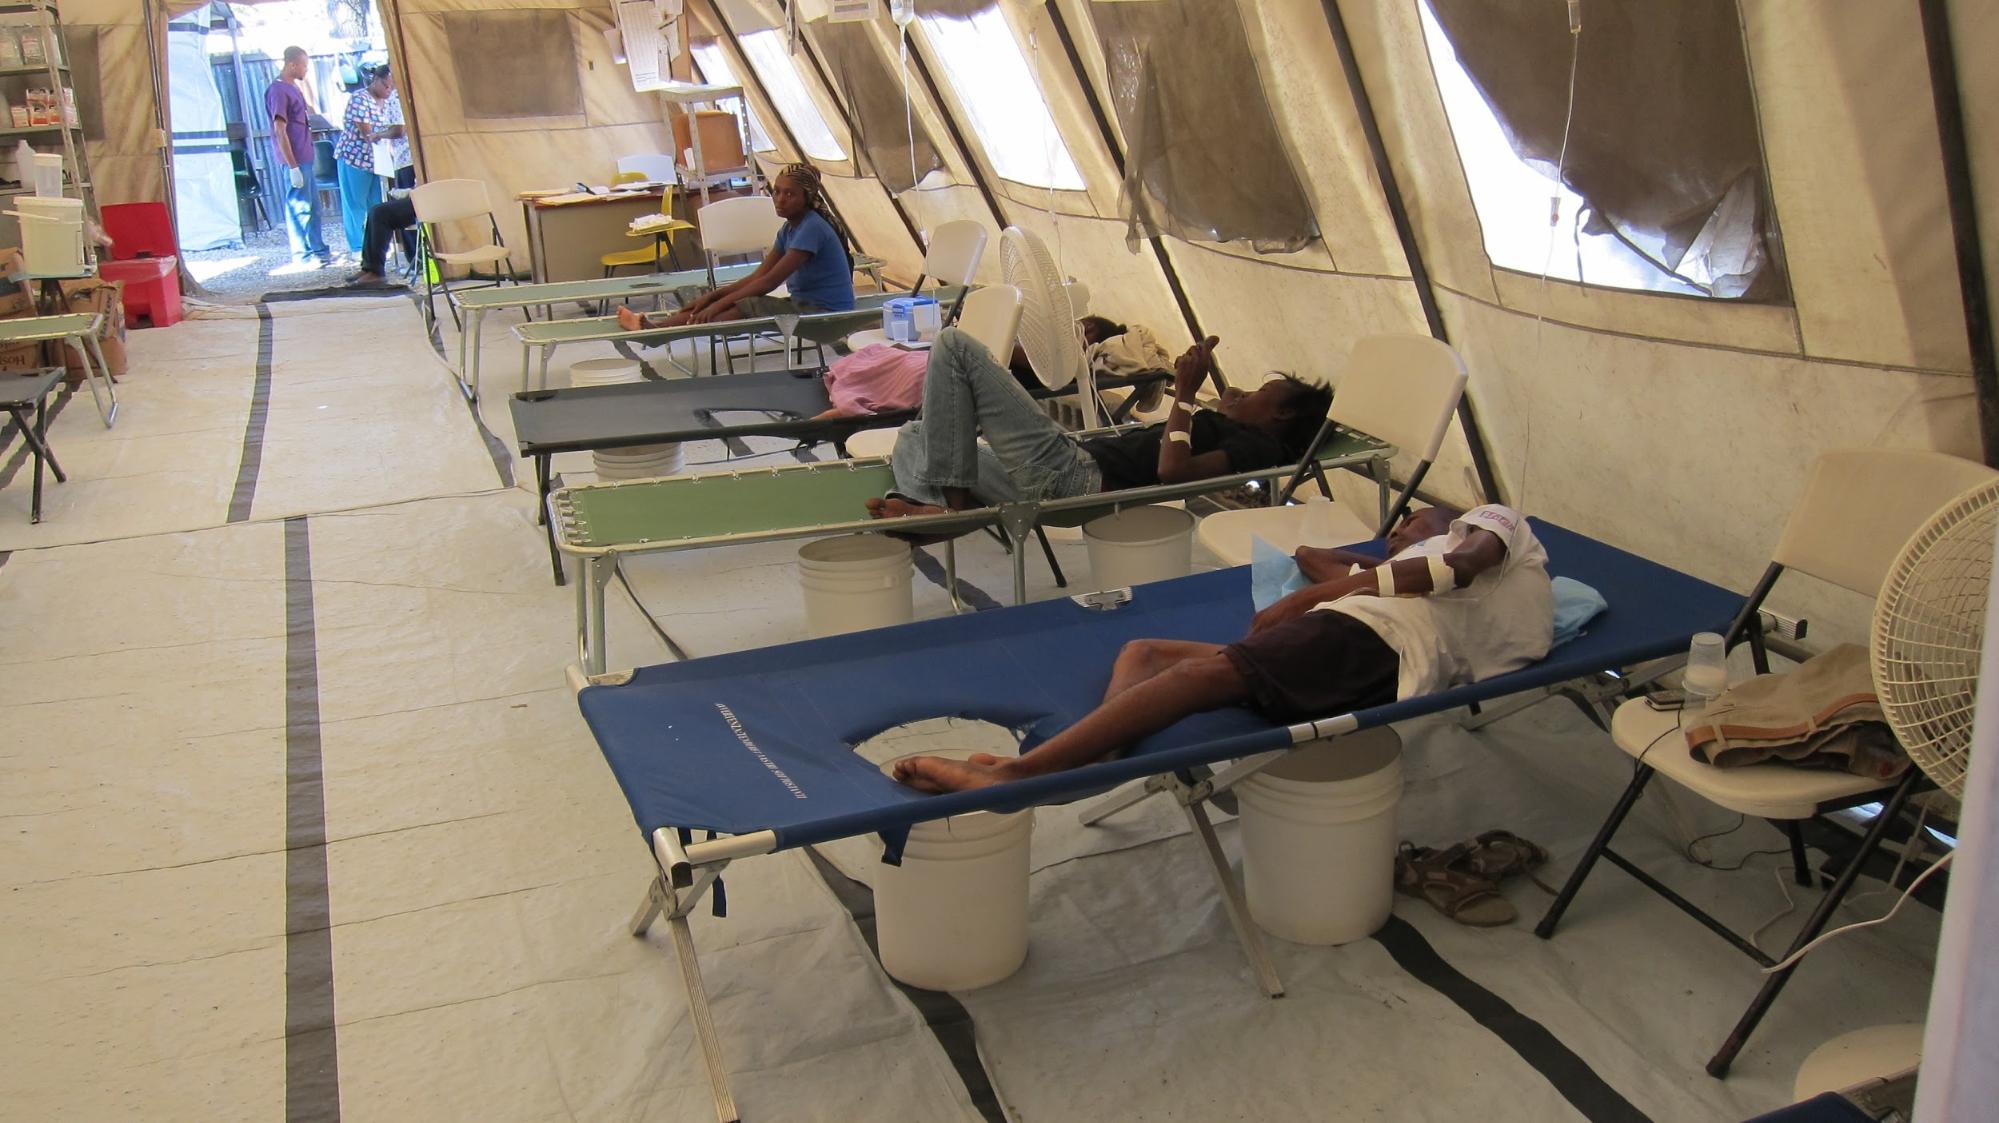 Scenes inside of a cholera treatment center in Haiti. Flickr Creative Commons image via CDC Global. 